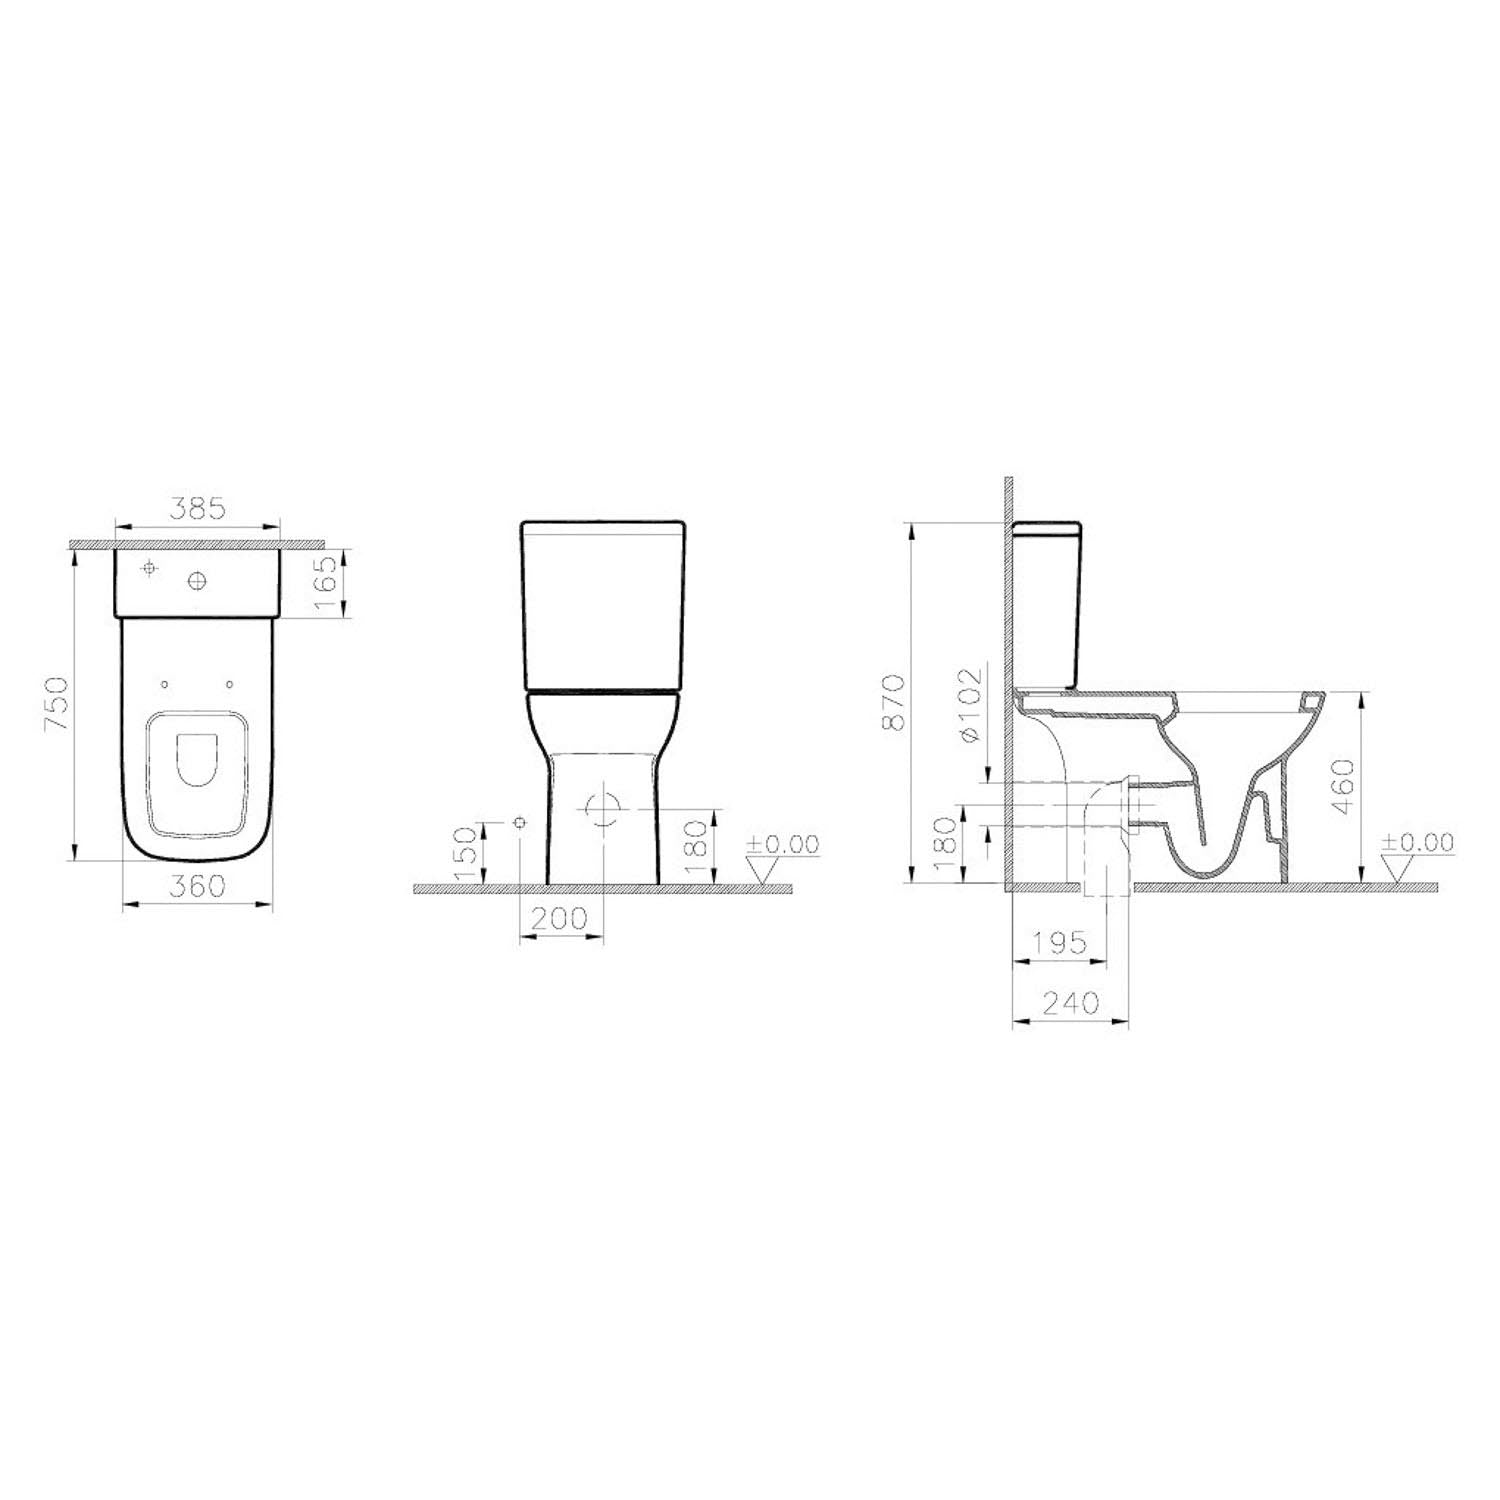 Consilio Comfort Height Close Coupled Toilet dimensional drawing